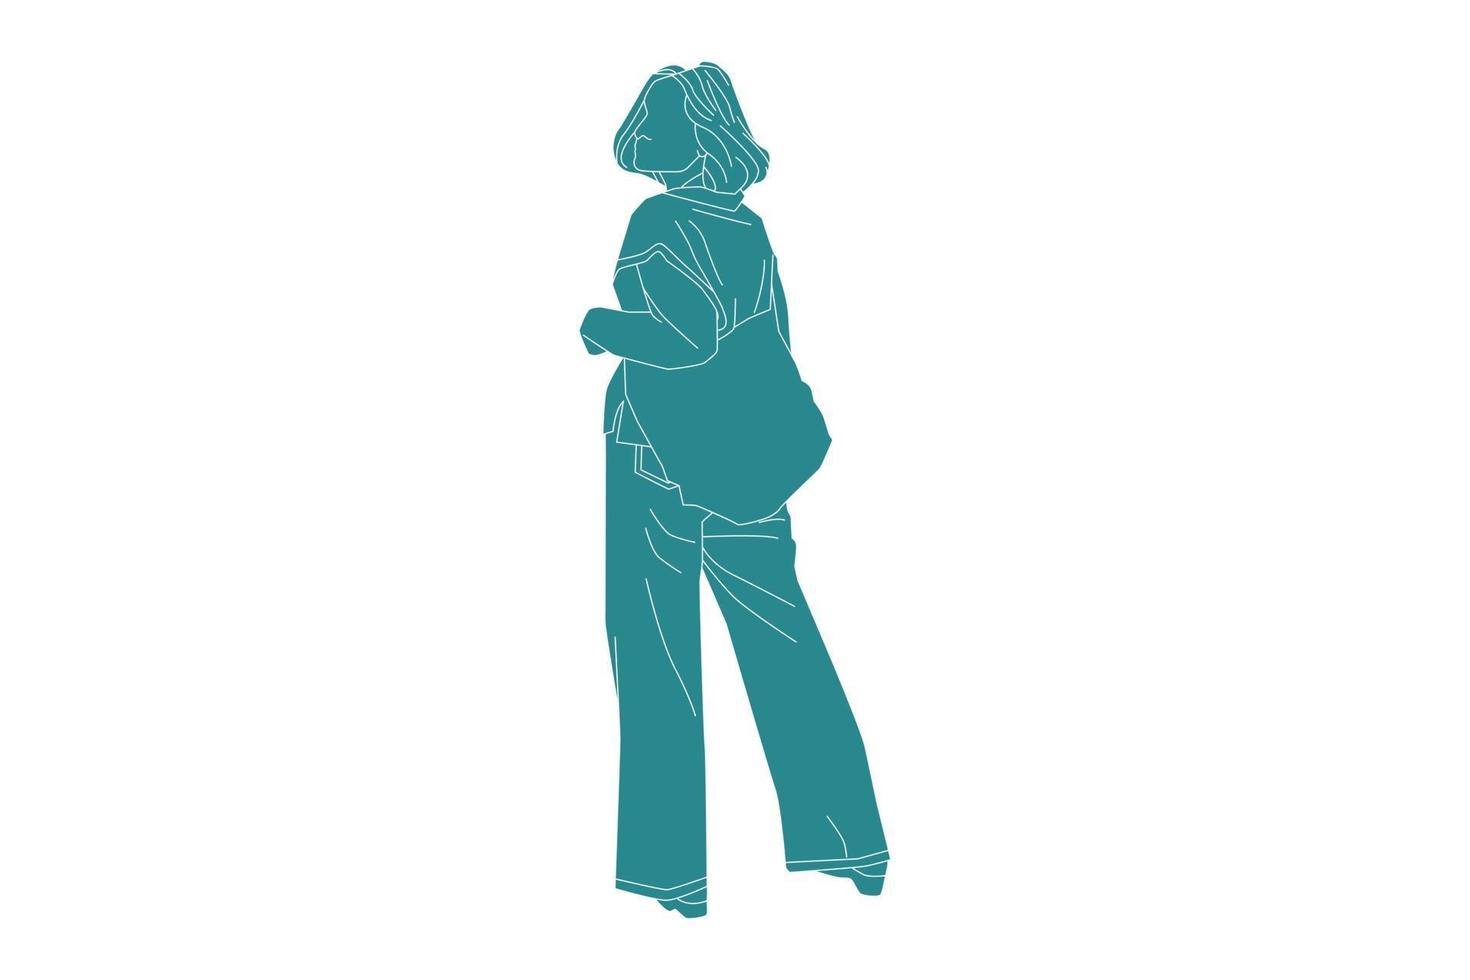 Vector illustration of casual woman seen from behind with her bag, Flat style with outline